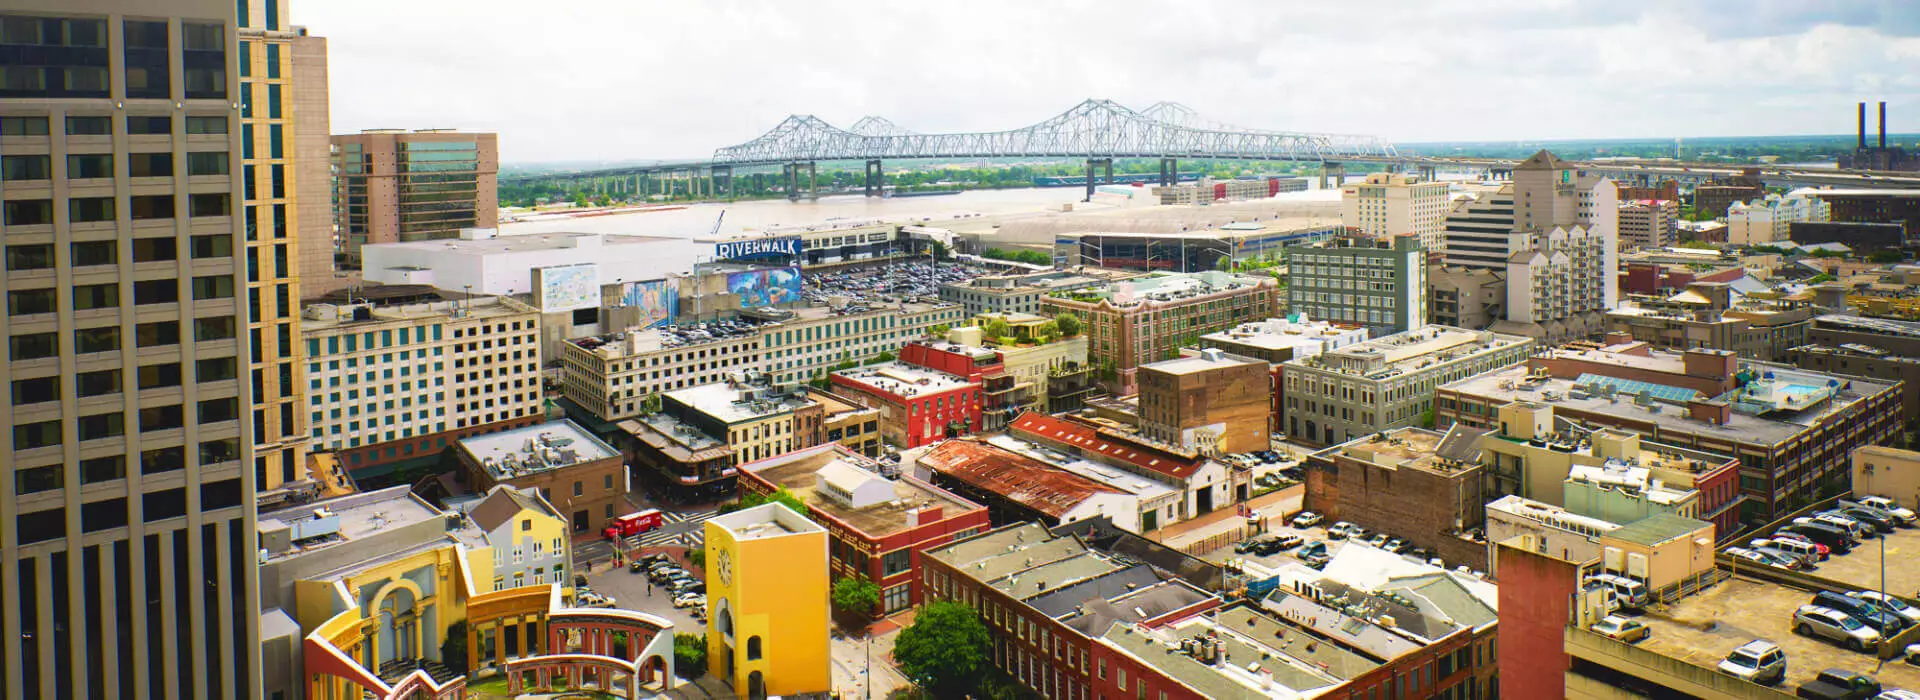 Lamothe's Law Firm Office View of New Orleans